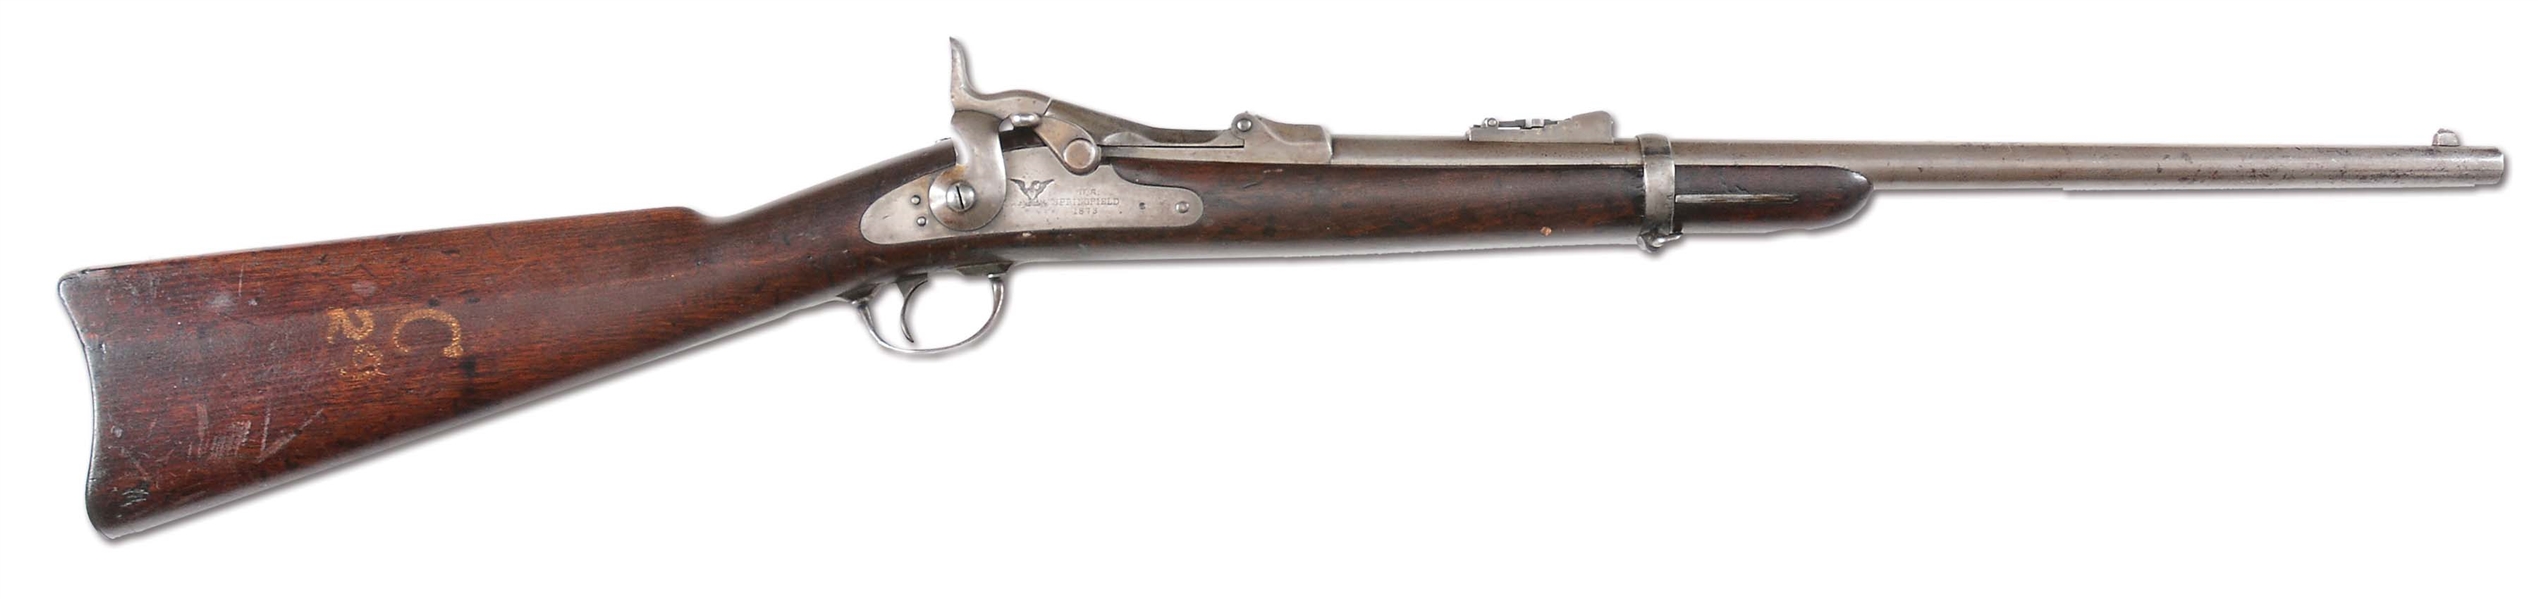 (A) CUSTER RANGE U.S. SPRINGFIELD TRAPDOOR CARBINE WITH RELATED MATERIALS.